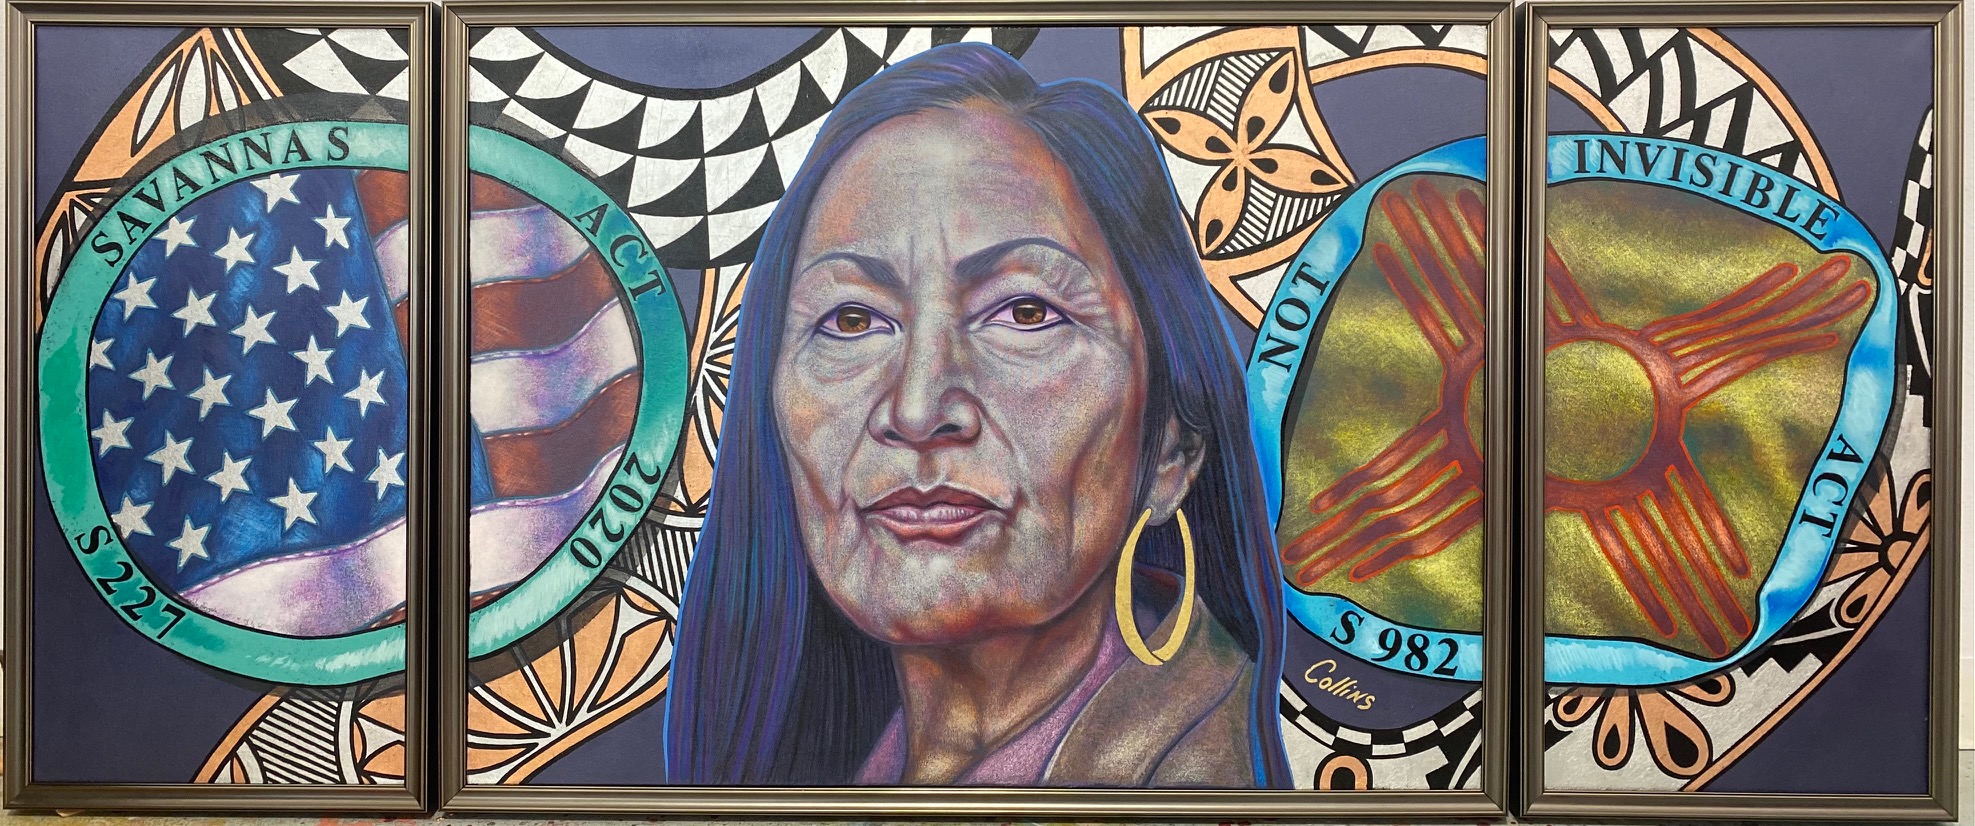 "Be Fierce," Ojibwe artist Patrick Collins' tribute  to U.S. Secretary of the Interior Deb Haaland, will be auctioned off during the  Pathways: Native Arts Festival, Friday, Aug. 20 through Sunday, Aug. 22 at the Buffalo Thunder Resort & Casino near Santa Fe.   (Patrick Collins)